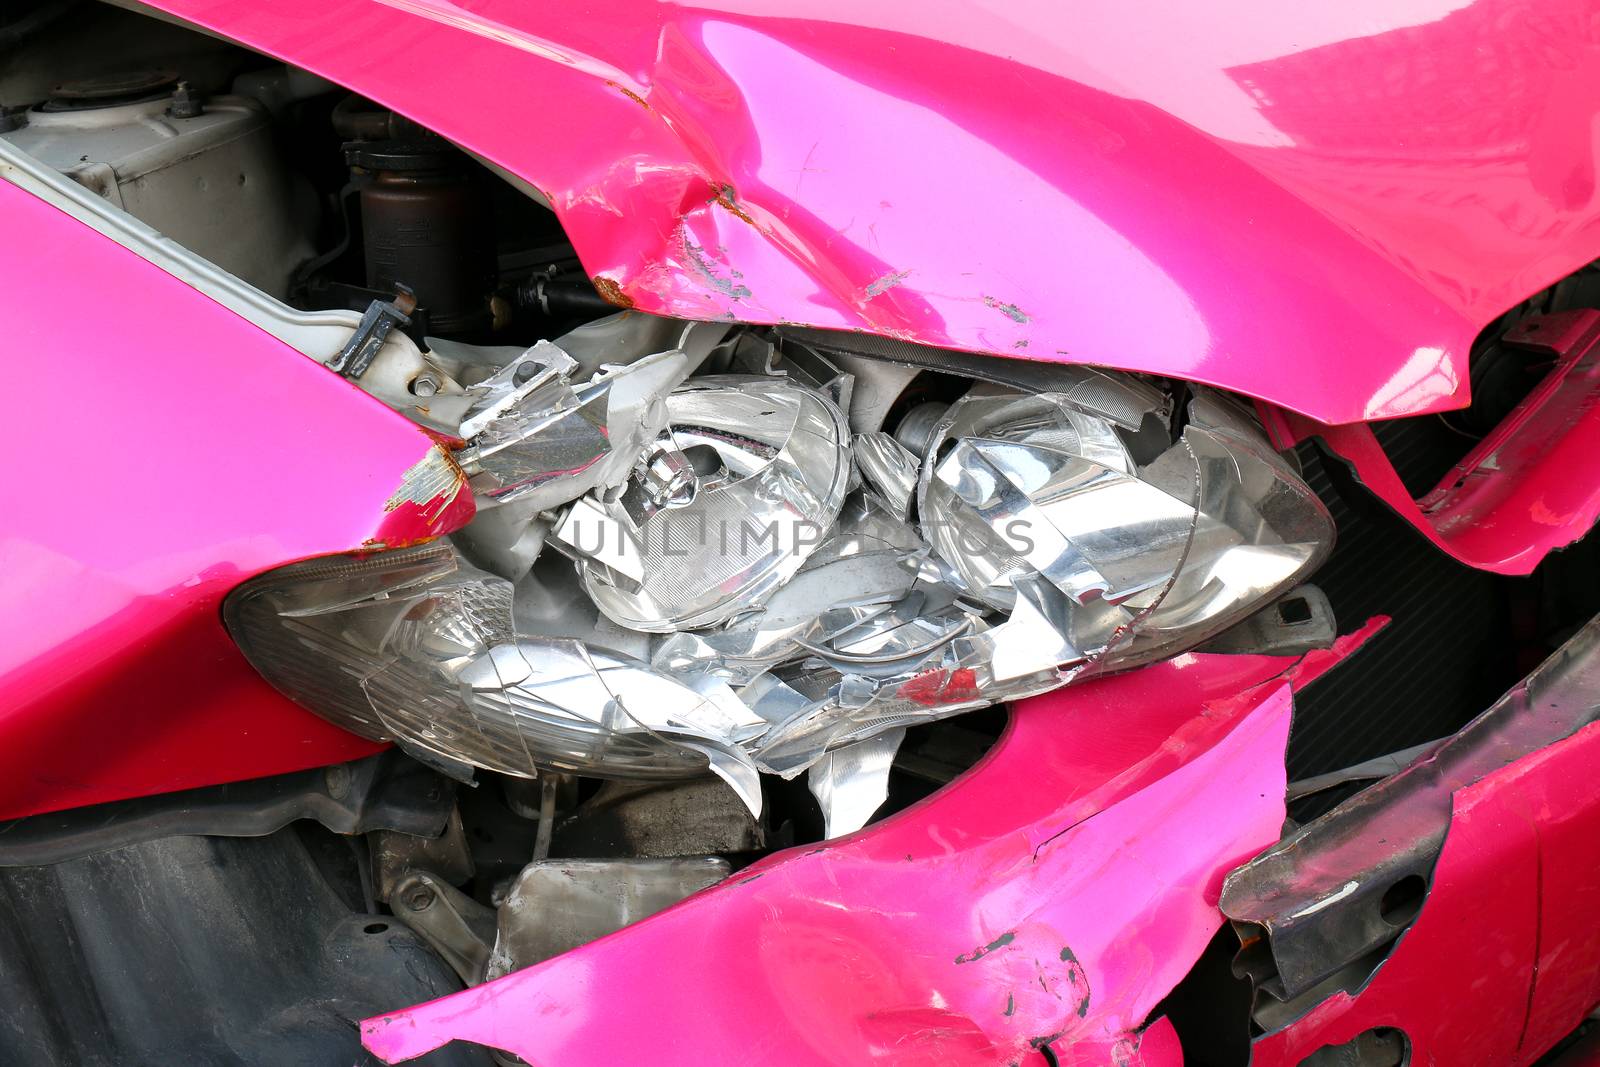 pink car accident damaged to headlights front, broken headlights car crash accident, damaged automobiles after collision of pink car accident